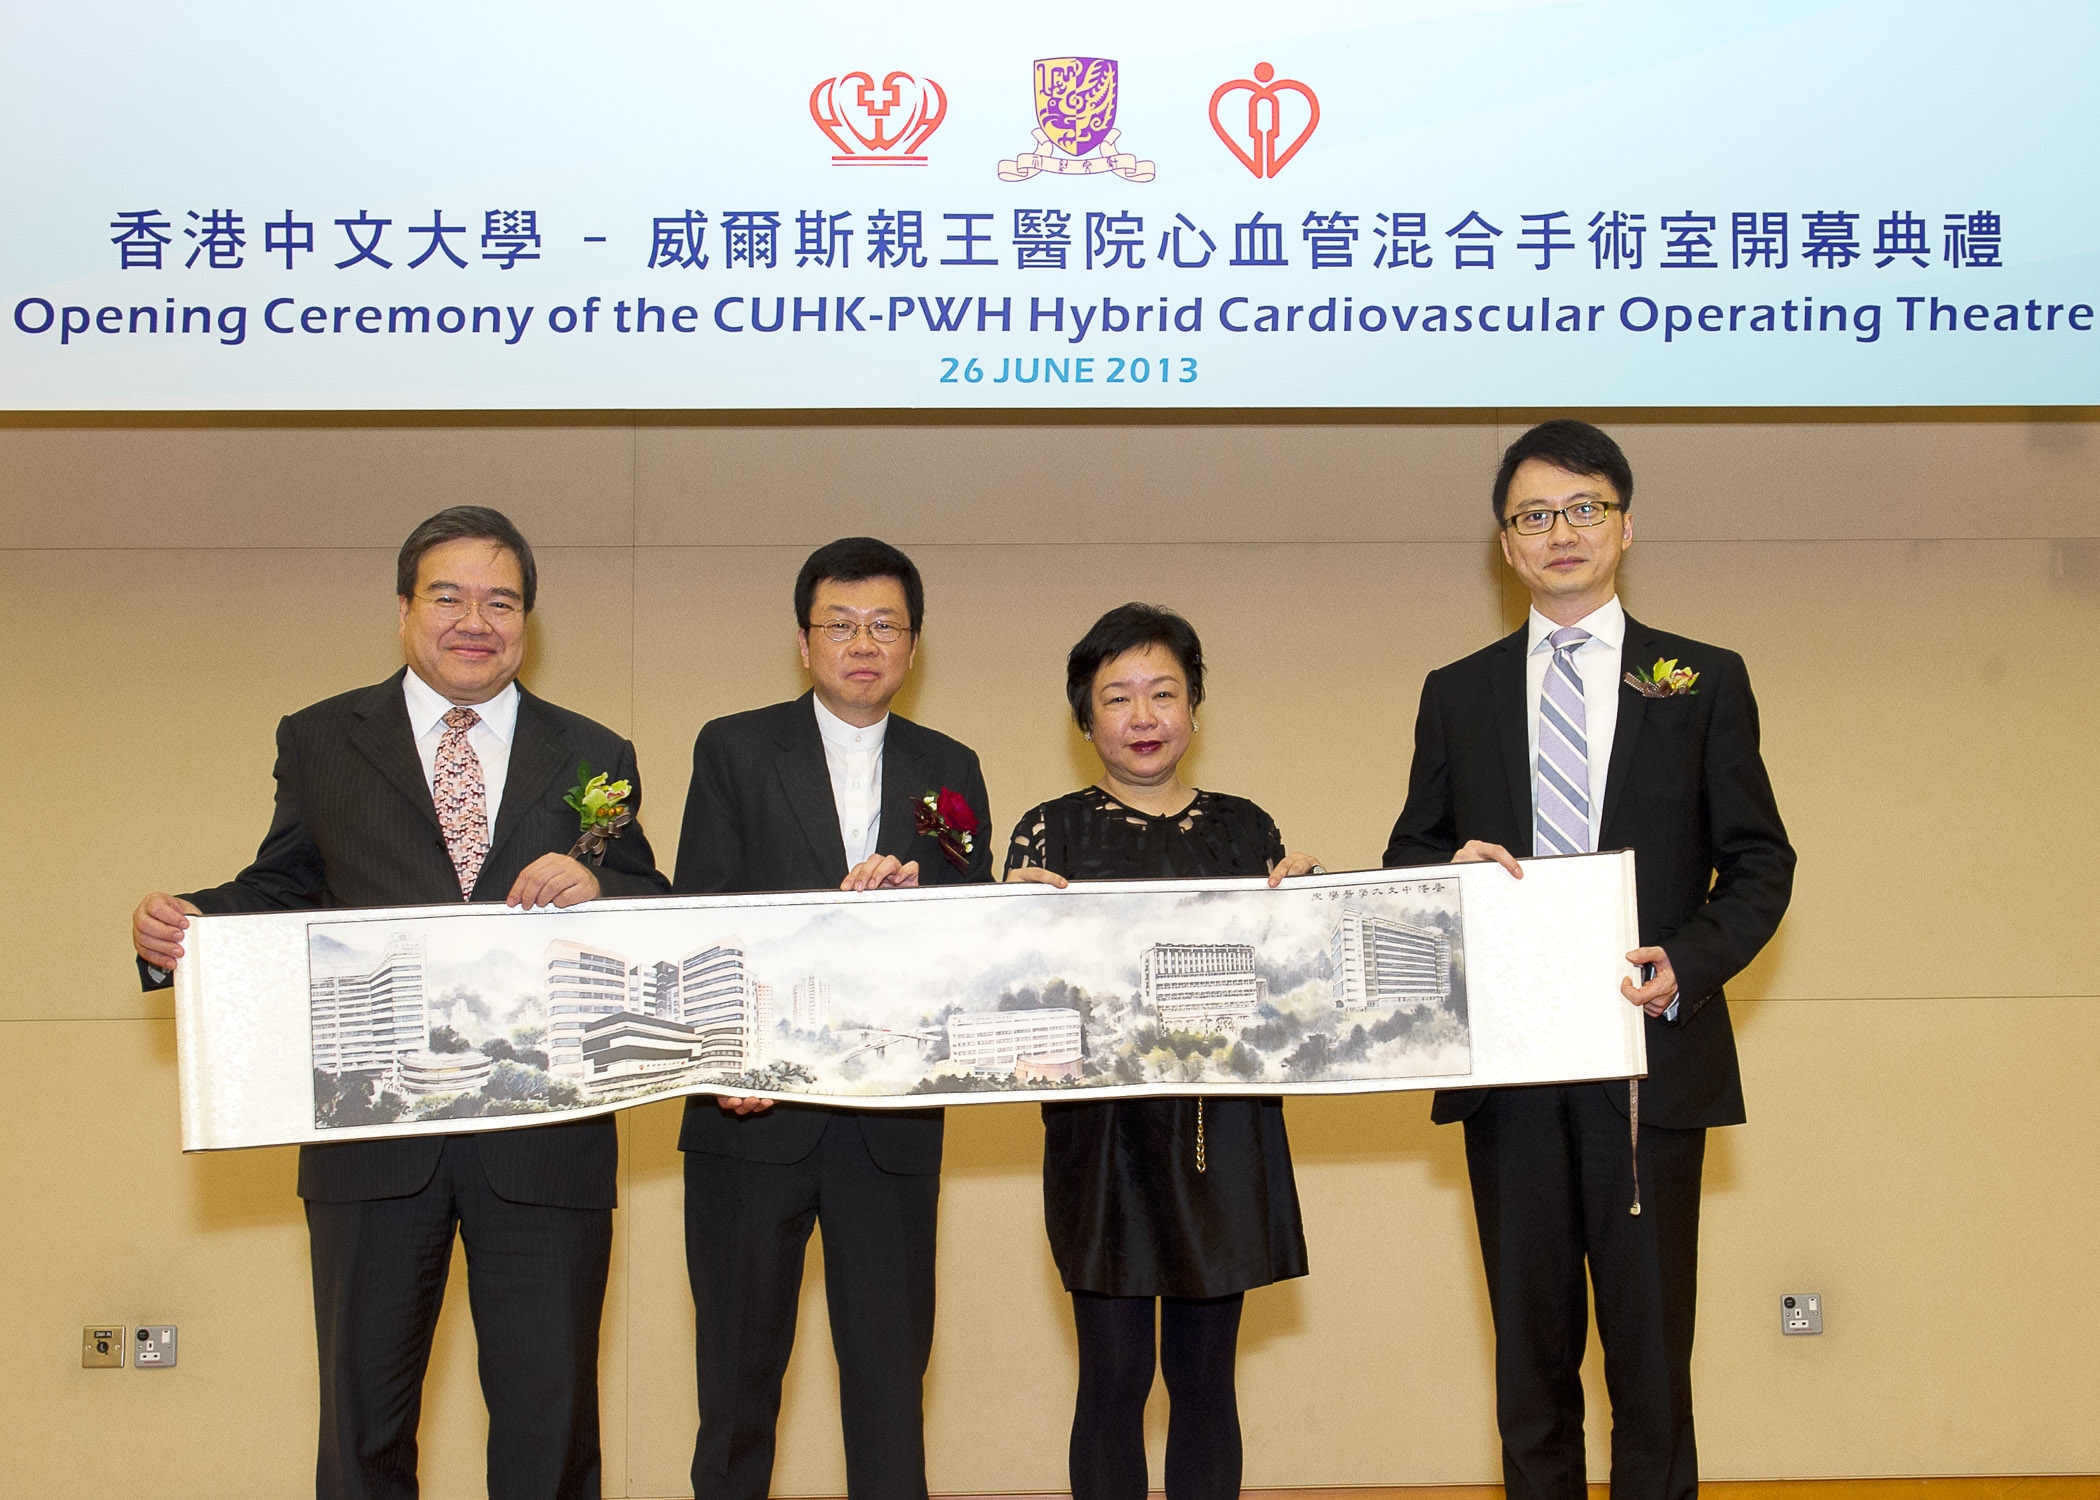 Mr. Anthony Wu, Chairman, Hospital Authority (left) and Prof. Francis K.L. Chan, Dean of Medicine, CUHK (right) present a souvenir to Ms. Grace Fong Yin-cheung and Mr. Raymond Yim Chun-man, representatives of the donor